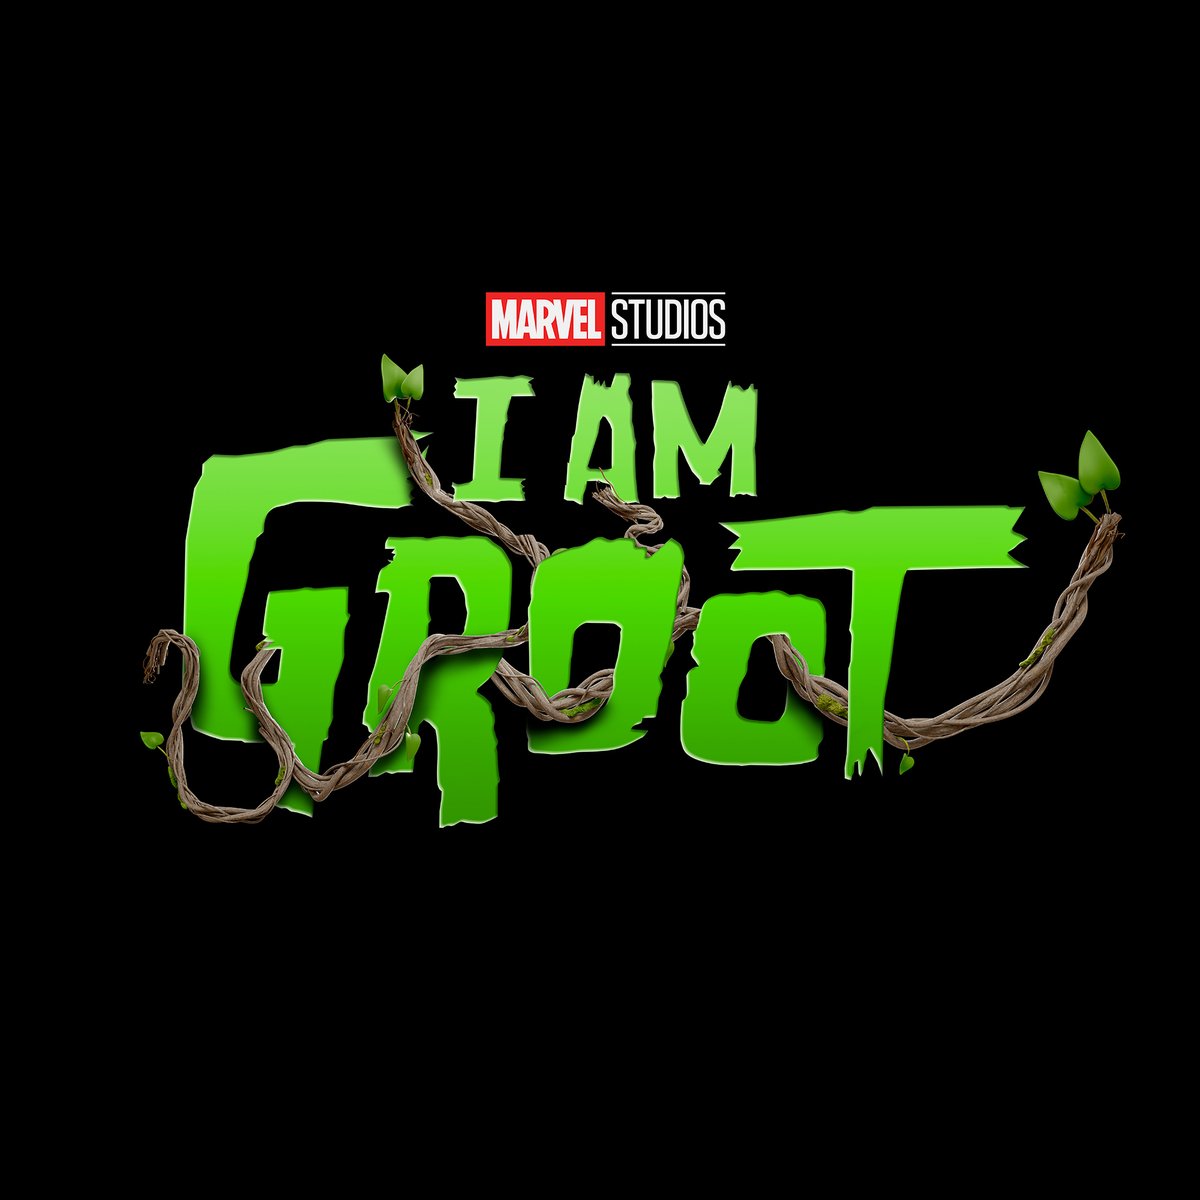 Everyone’s favorite little tree, Baby Groot, will star in a series of shorts on  @DisneyPlus featuring several new and unusual characters. I Am Groot, an Original Series from  @MarvelStudios, is coming to  #DisneyPlus.